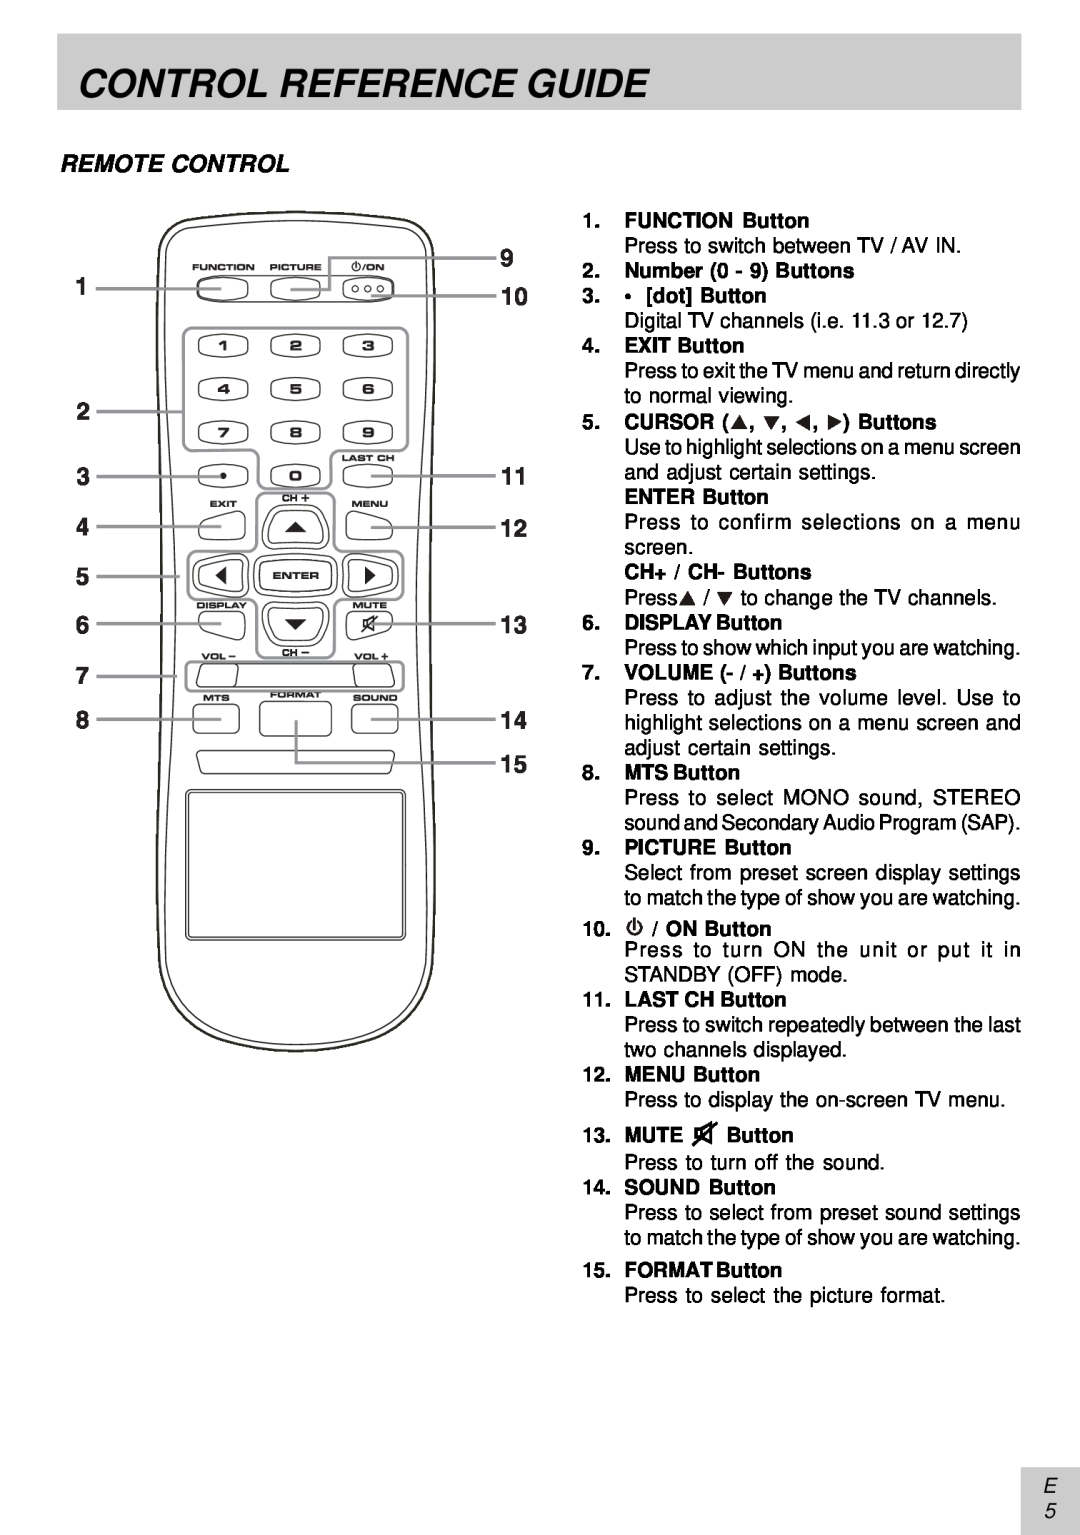 Audiovox PLV16081 instruction manual Control Reference Guide, Remote Control 